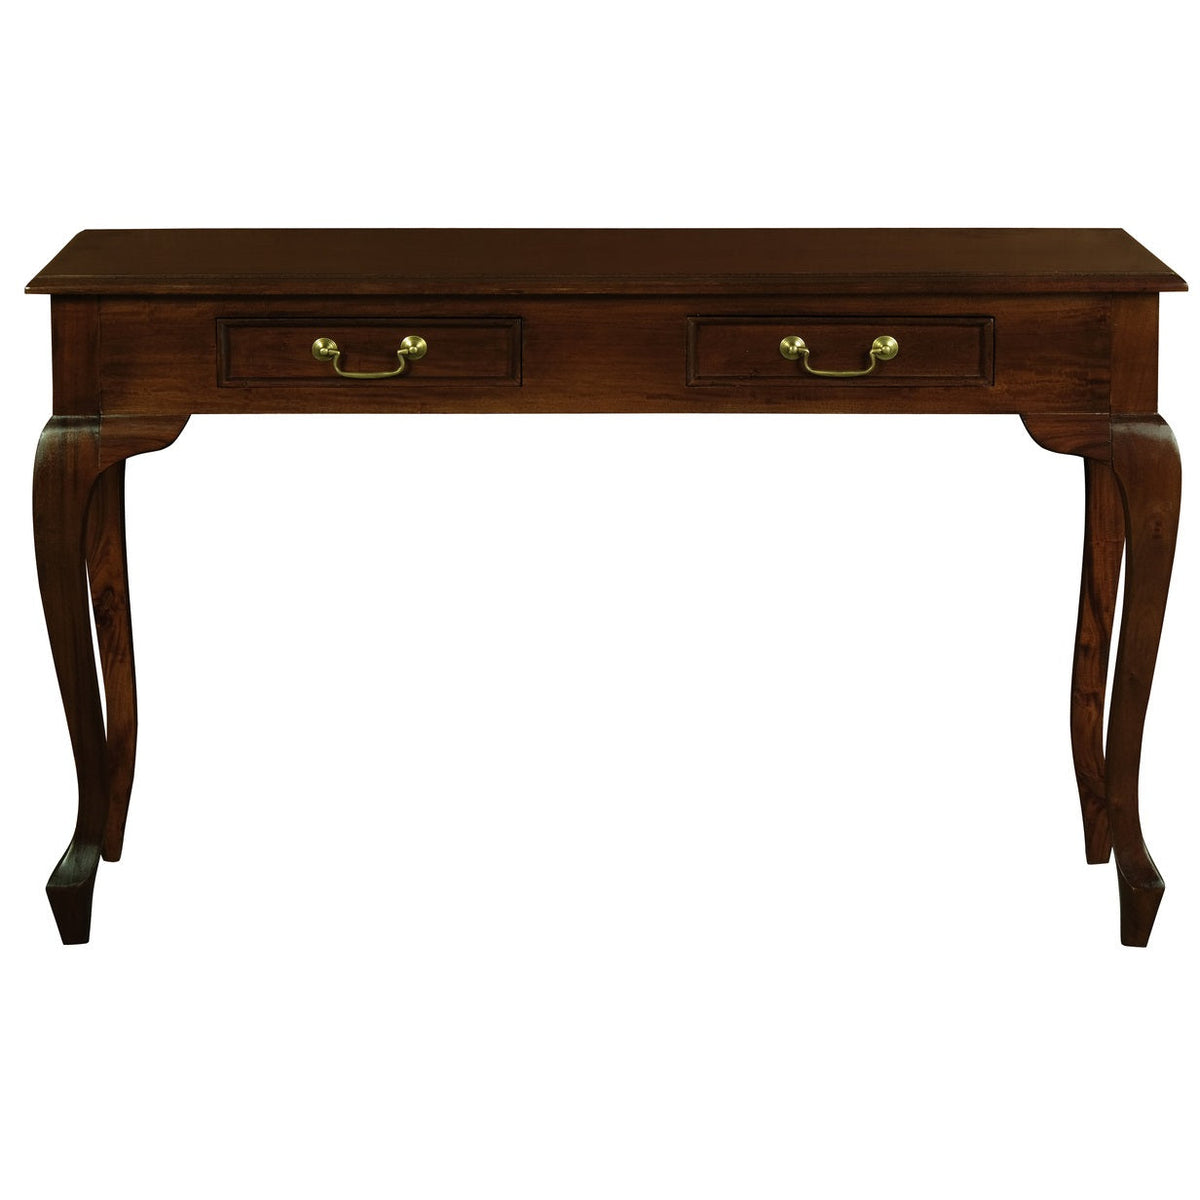 Queen Ann Console Table in Mahogany - 2 Drawer - Notbrand